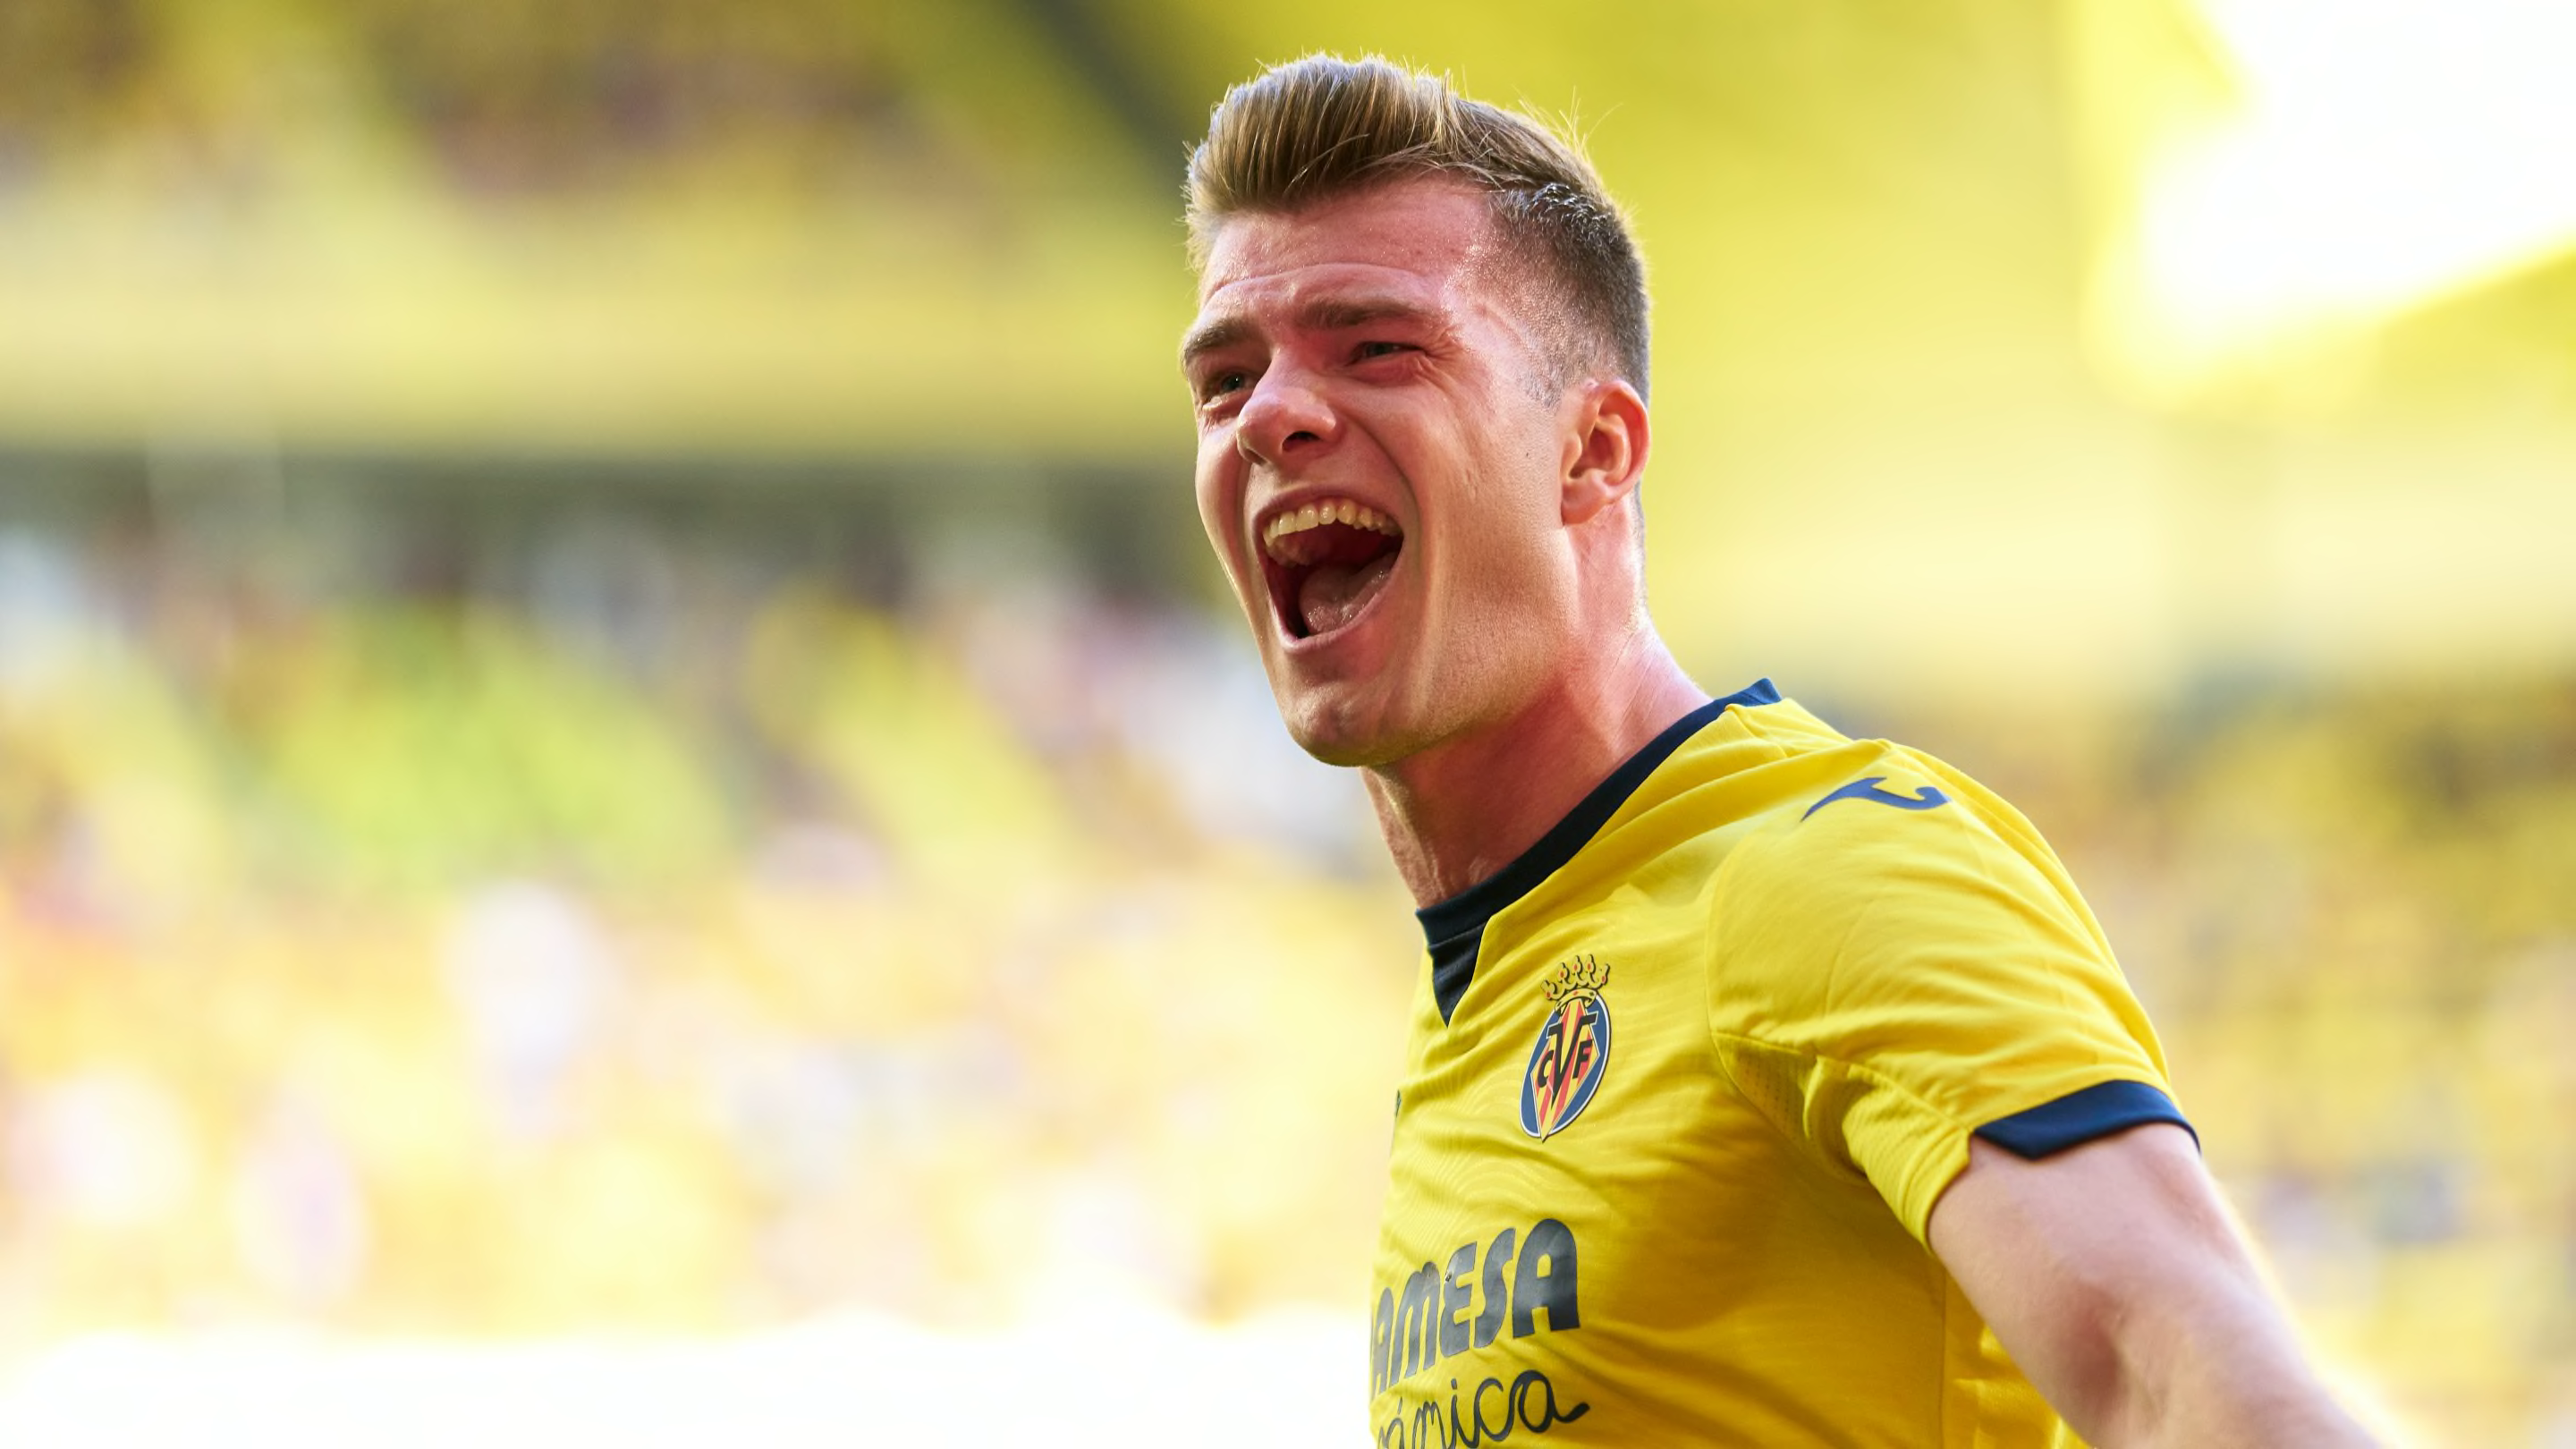 Villarreal 4-4 Real Madrid: Player ratings as Sorloth strikes four goals in chaotic draw